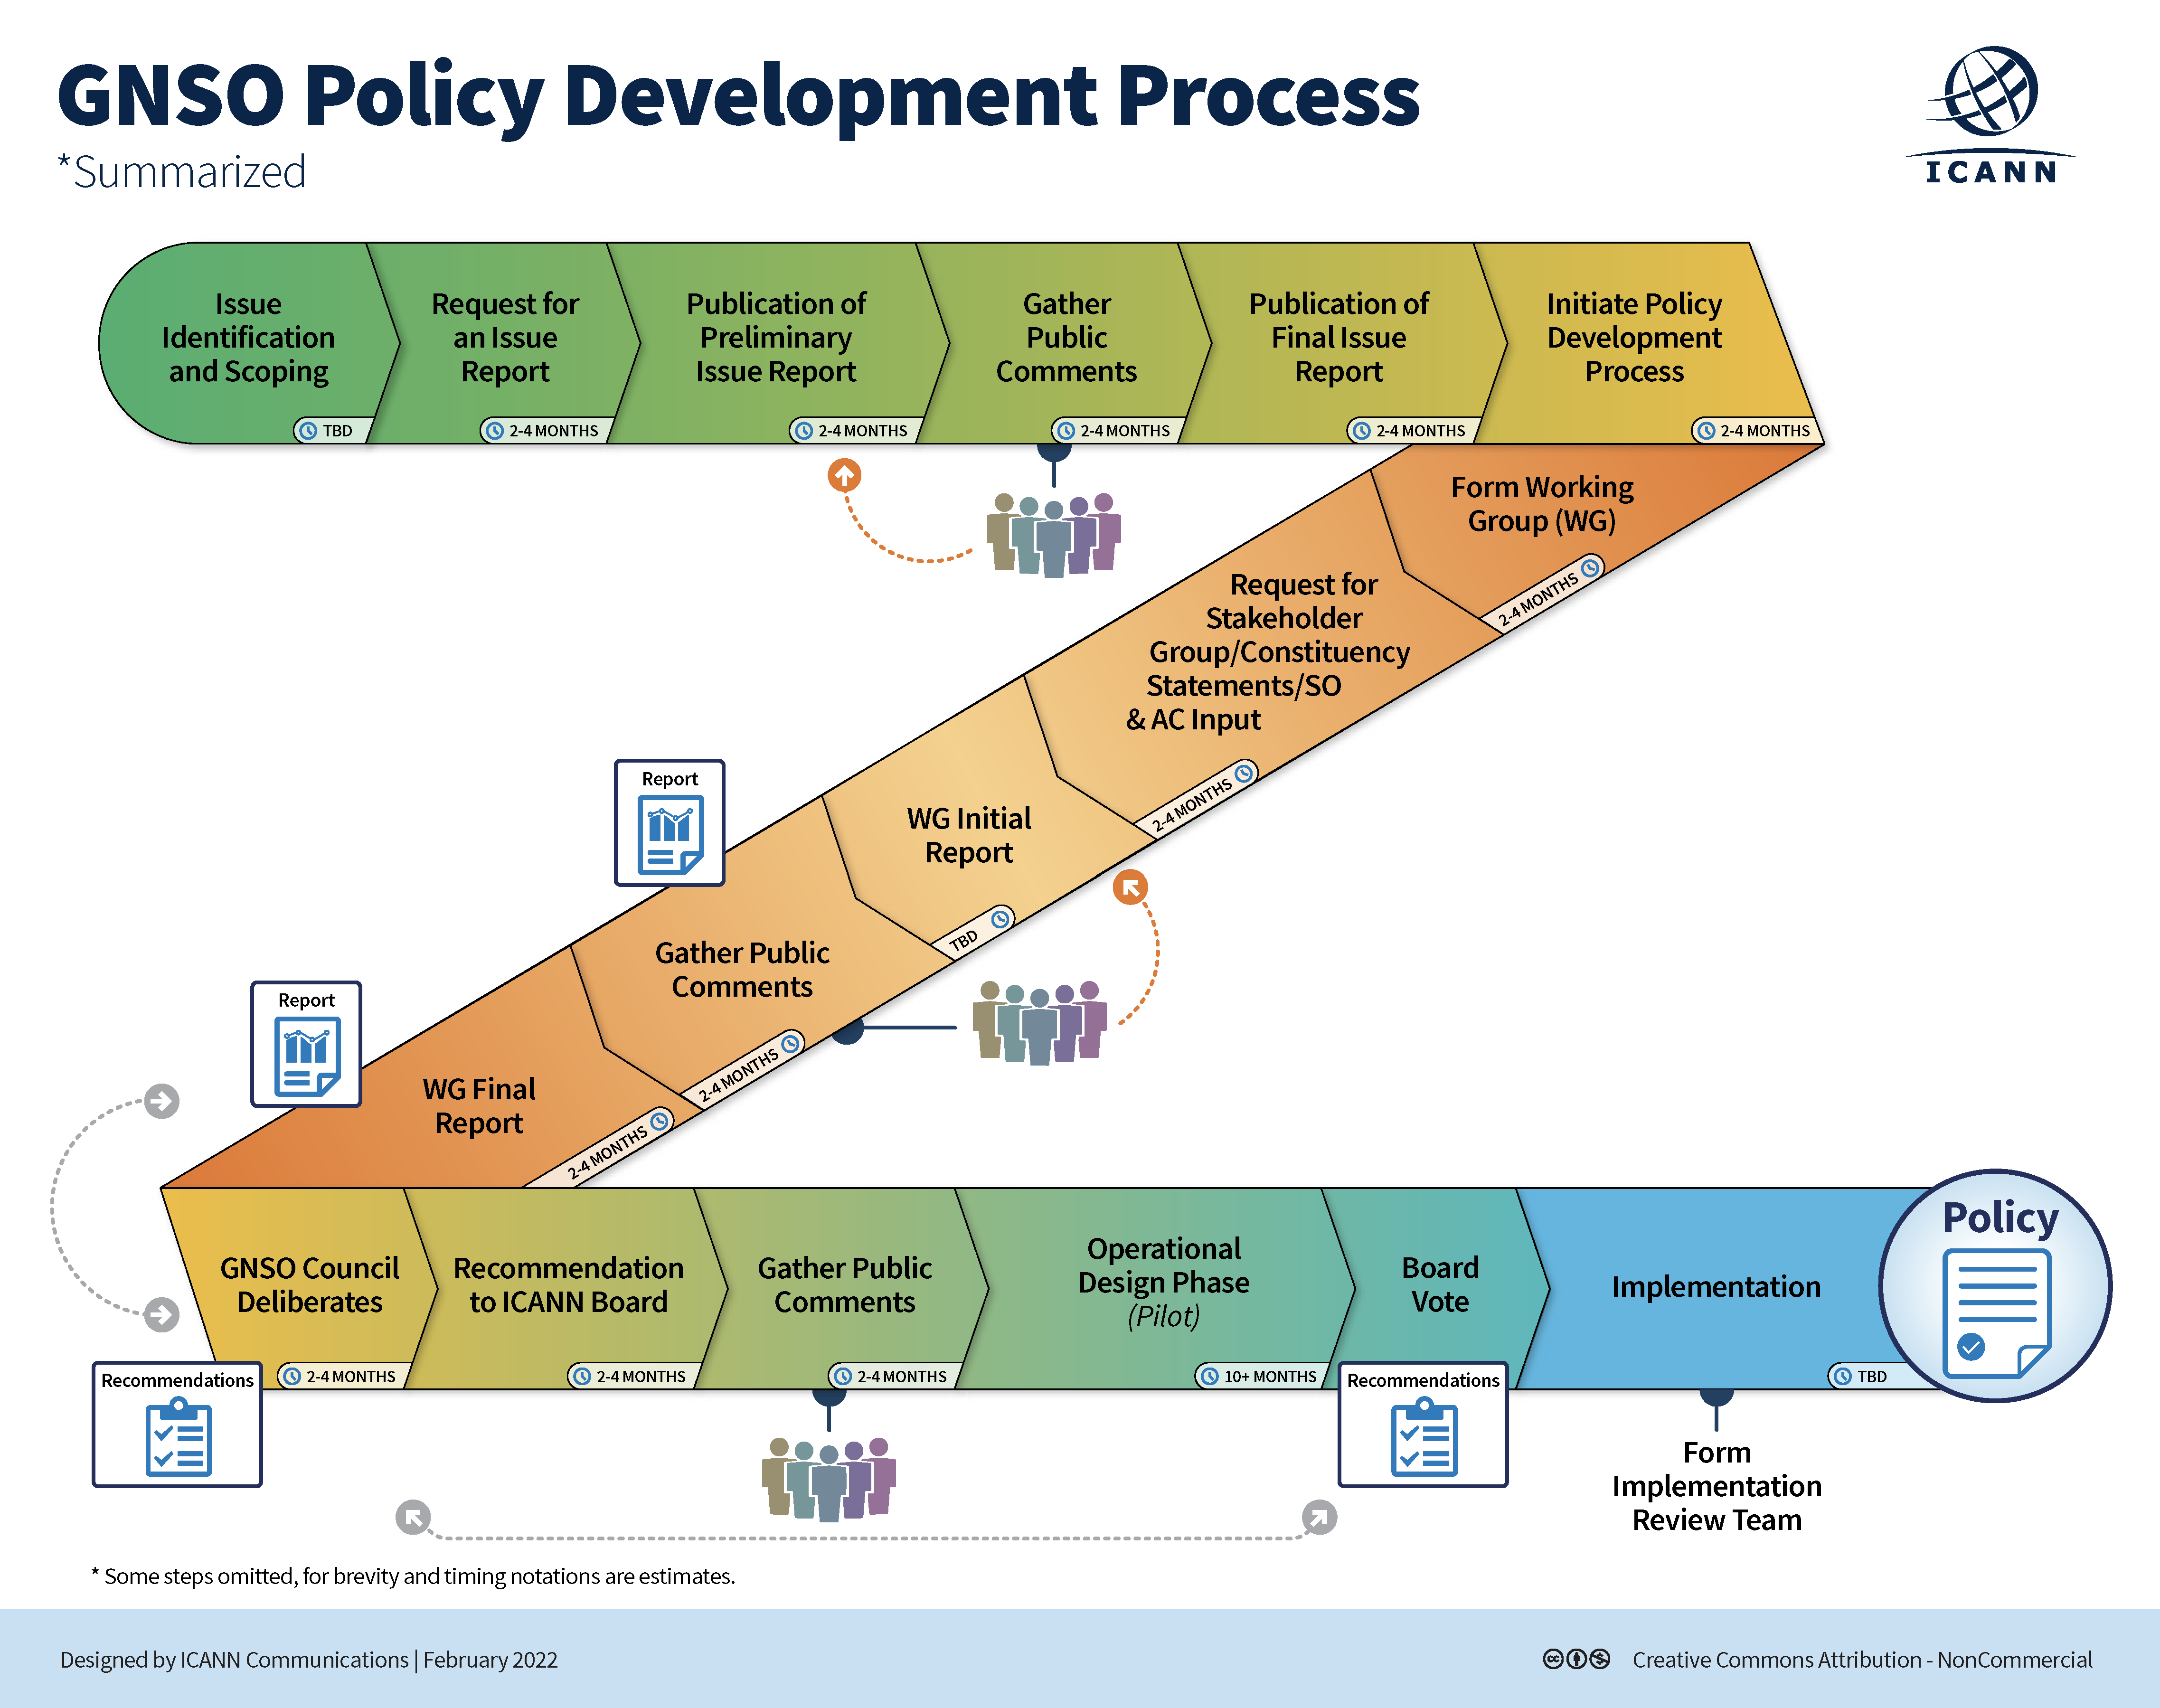 GNSO Policy Development Process (PDP) | Summarized